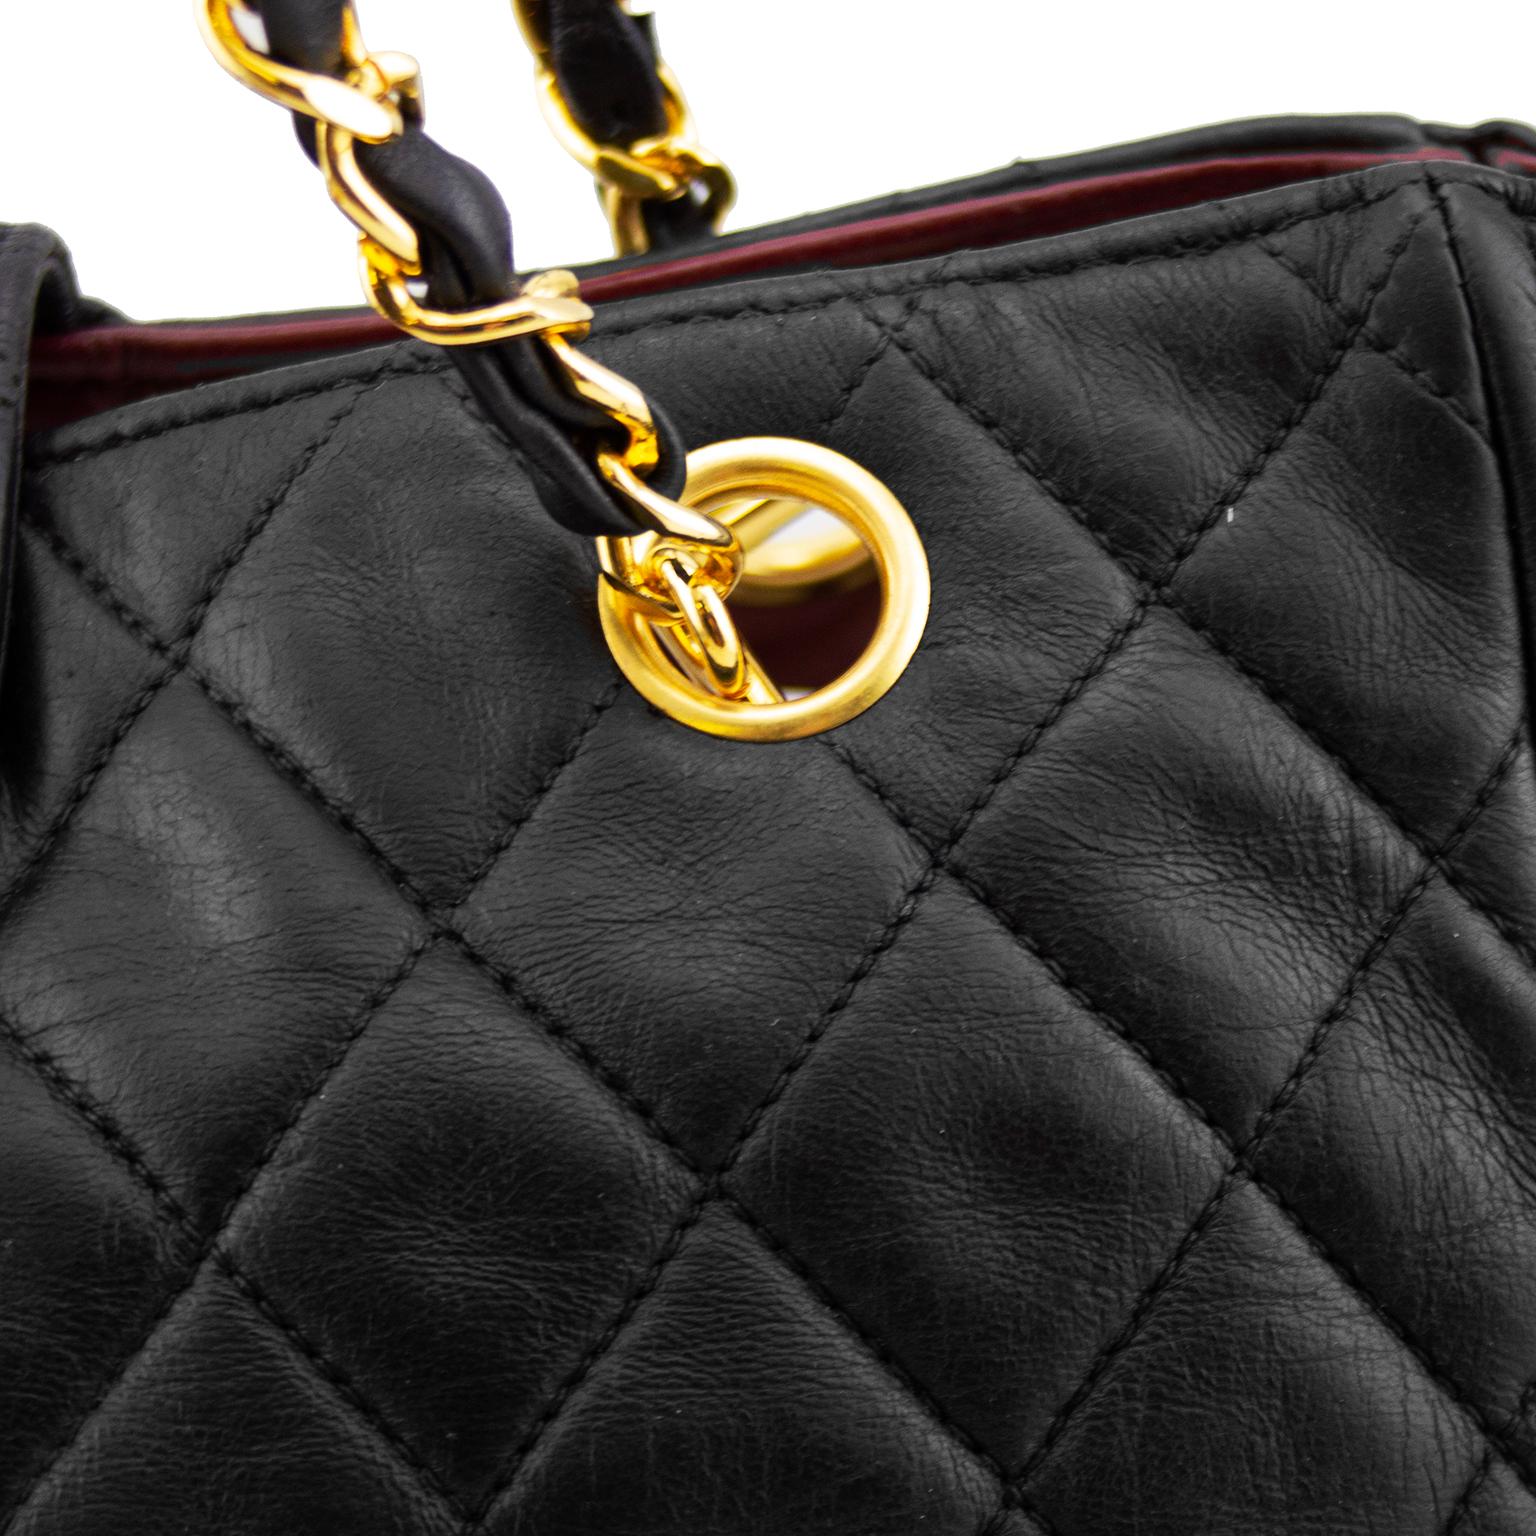 1980s Chanel Black Leather Quilted Medium Tote with Chain Handles  1